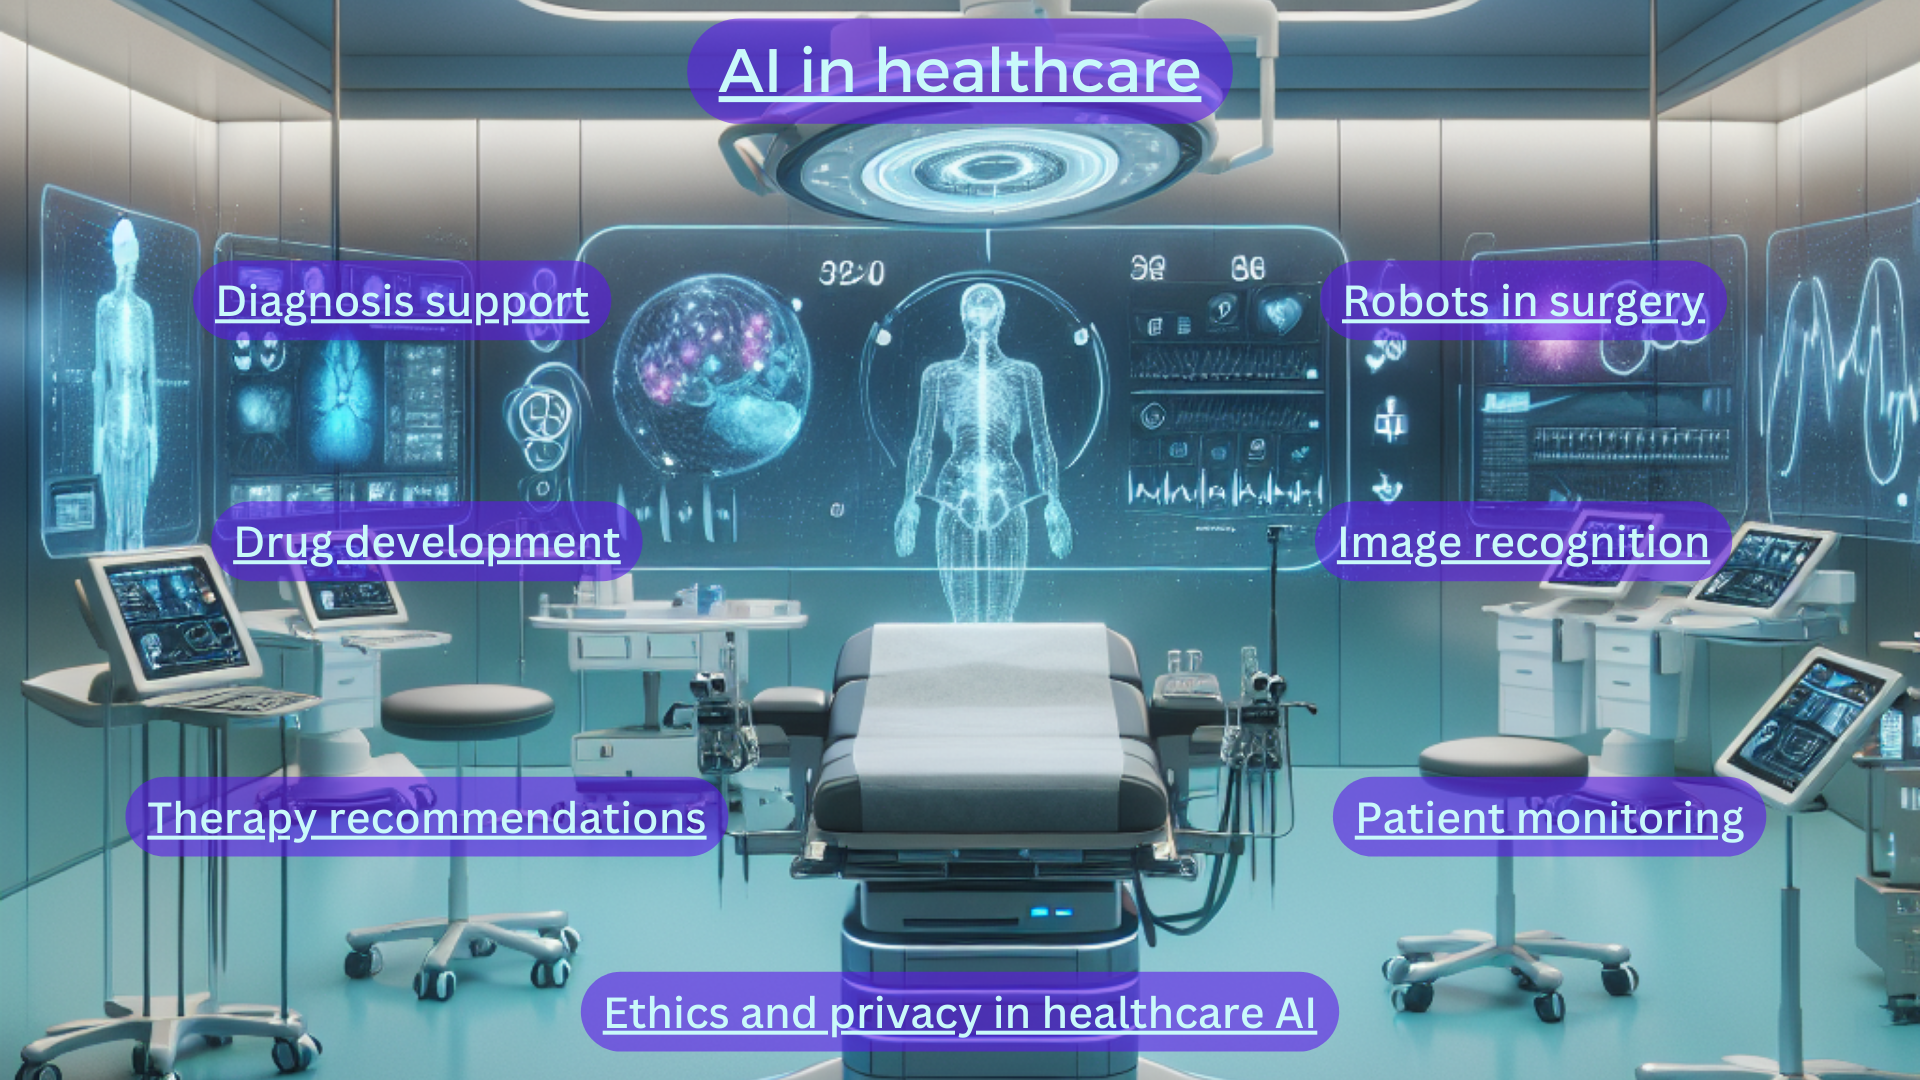 The use of AI in healthcare is multifaceted